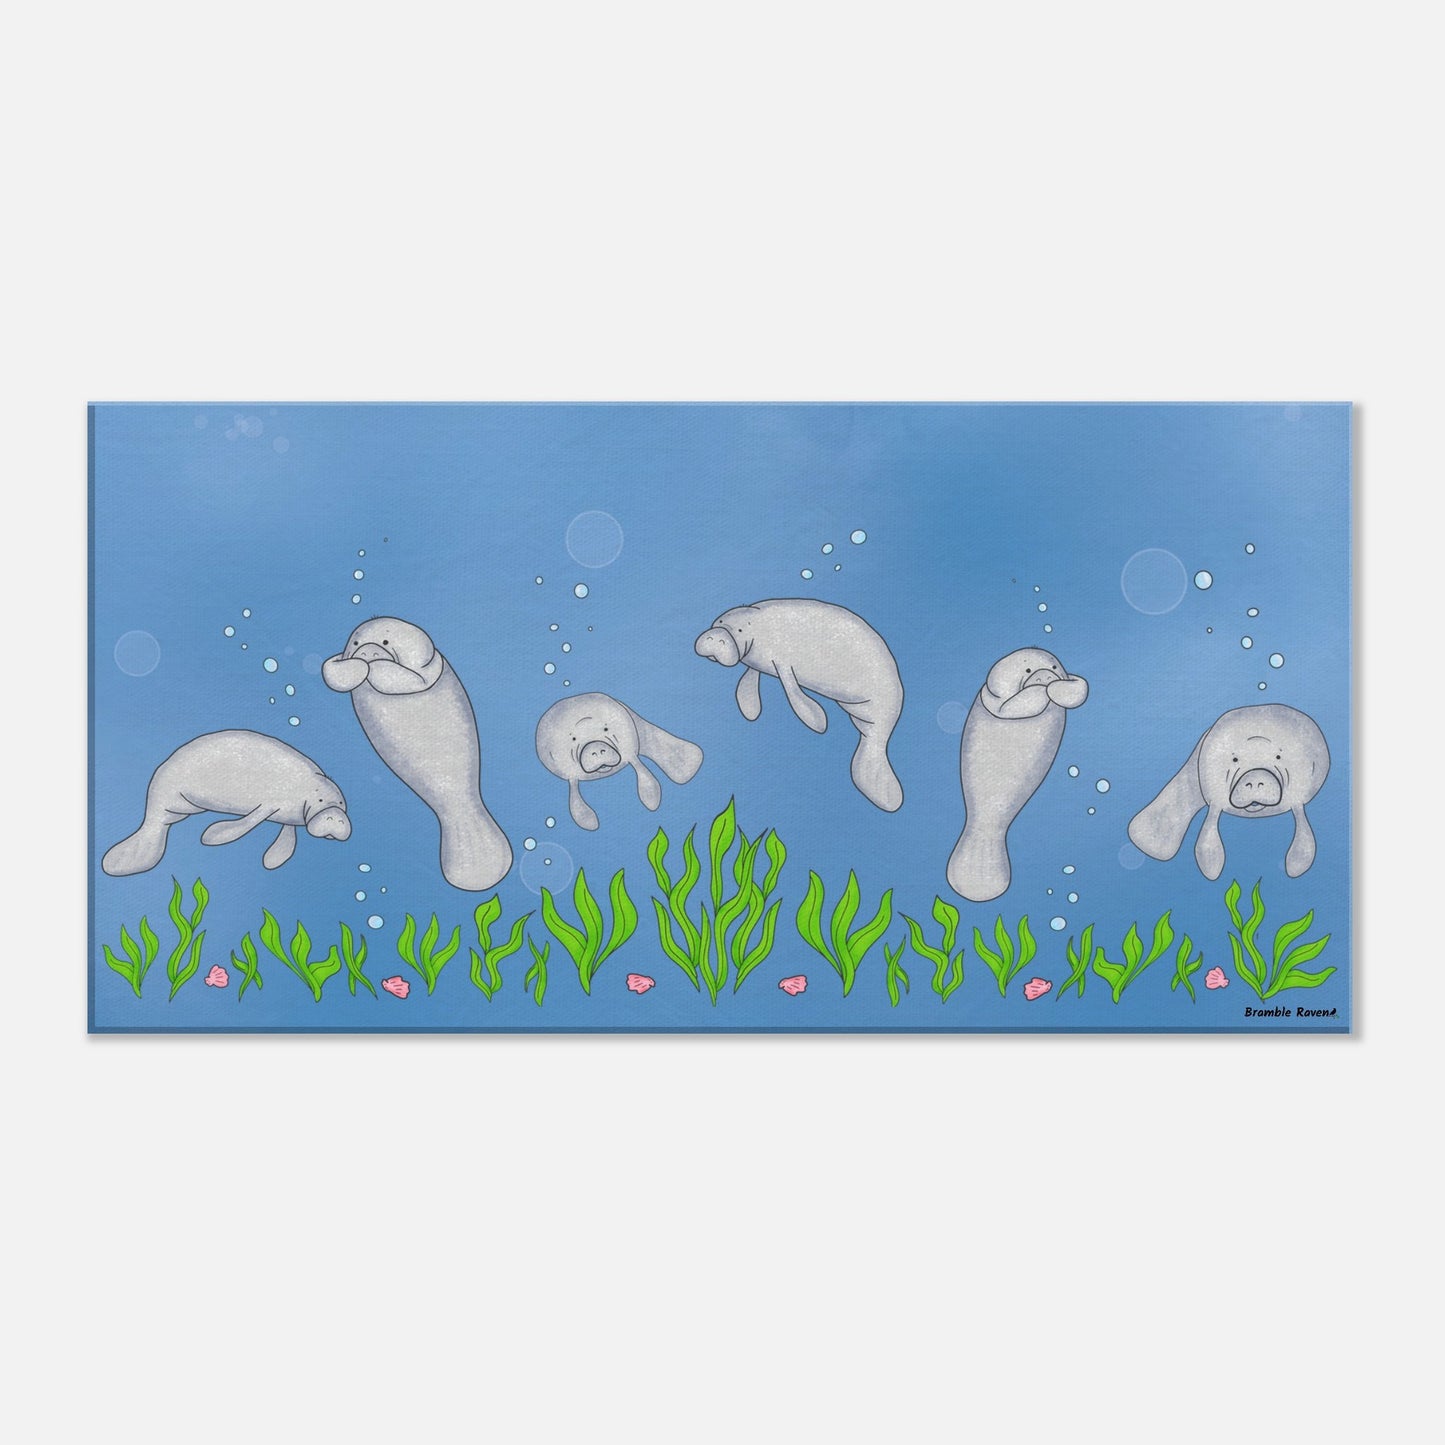 20 by 40 inch slim canvas wall art print featuring cute illustrated manatees swimming above the seabed. Hanging hardware included.